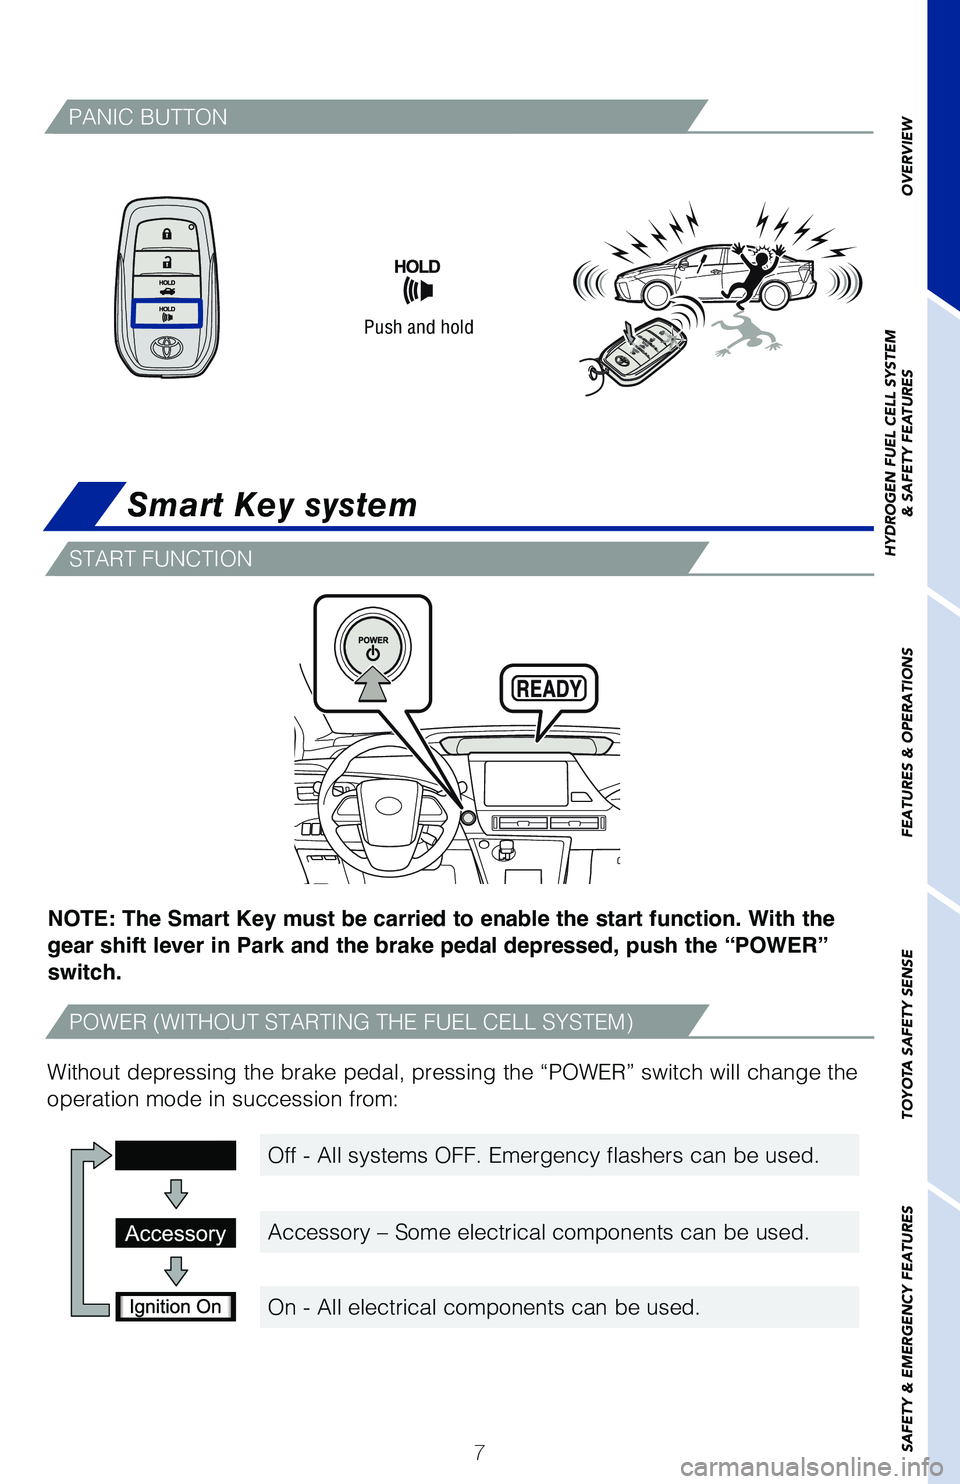 TOYOTA MIRAI 2020  Owners Manual (in English) 7
Smart Key system
Push and hold
Without depressing the brake pedal, pressing the “POWER” switch wi\ll change the 
operation mode in succession from:
PANIC BUTTON
OVERVIEW
HYDROGEN FUEL CELL SYST